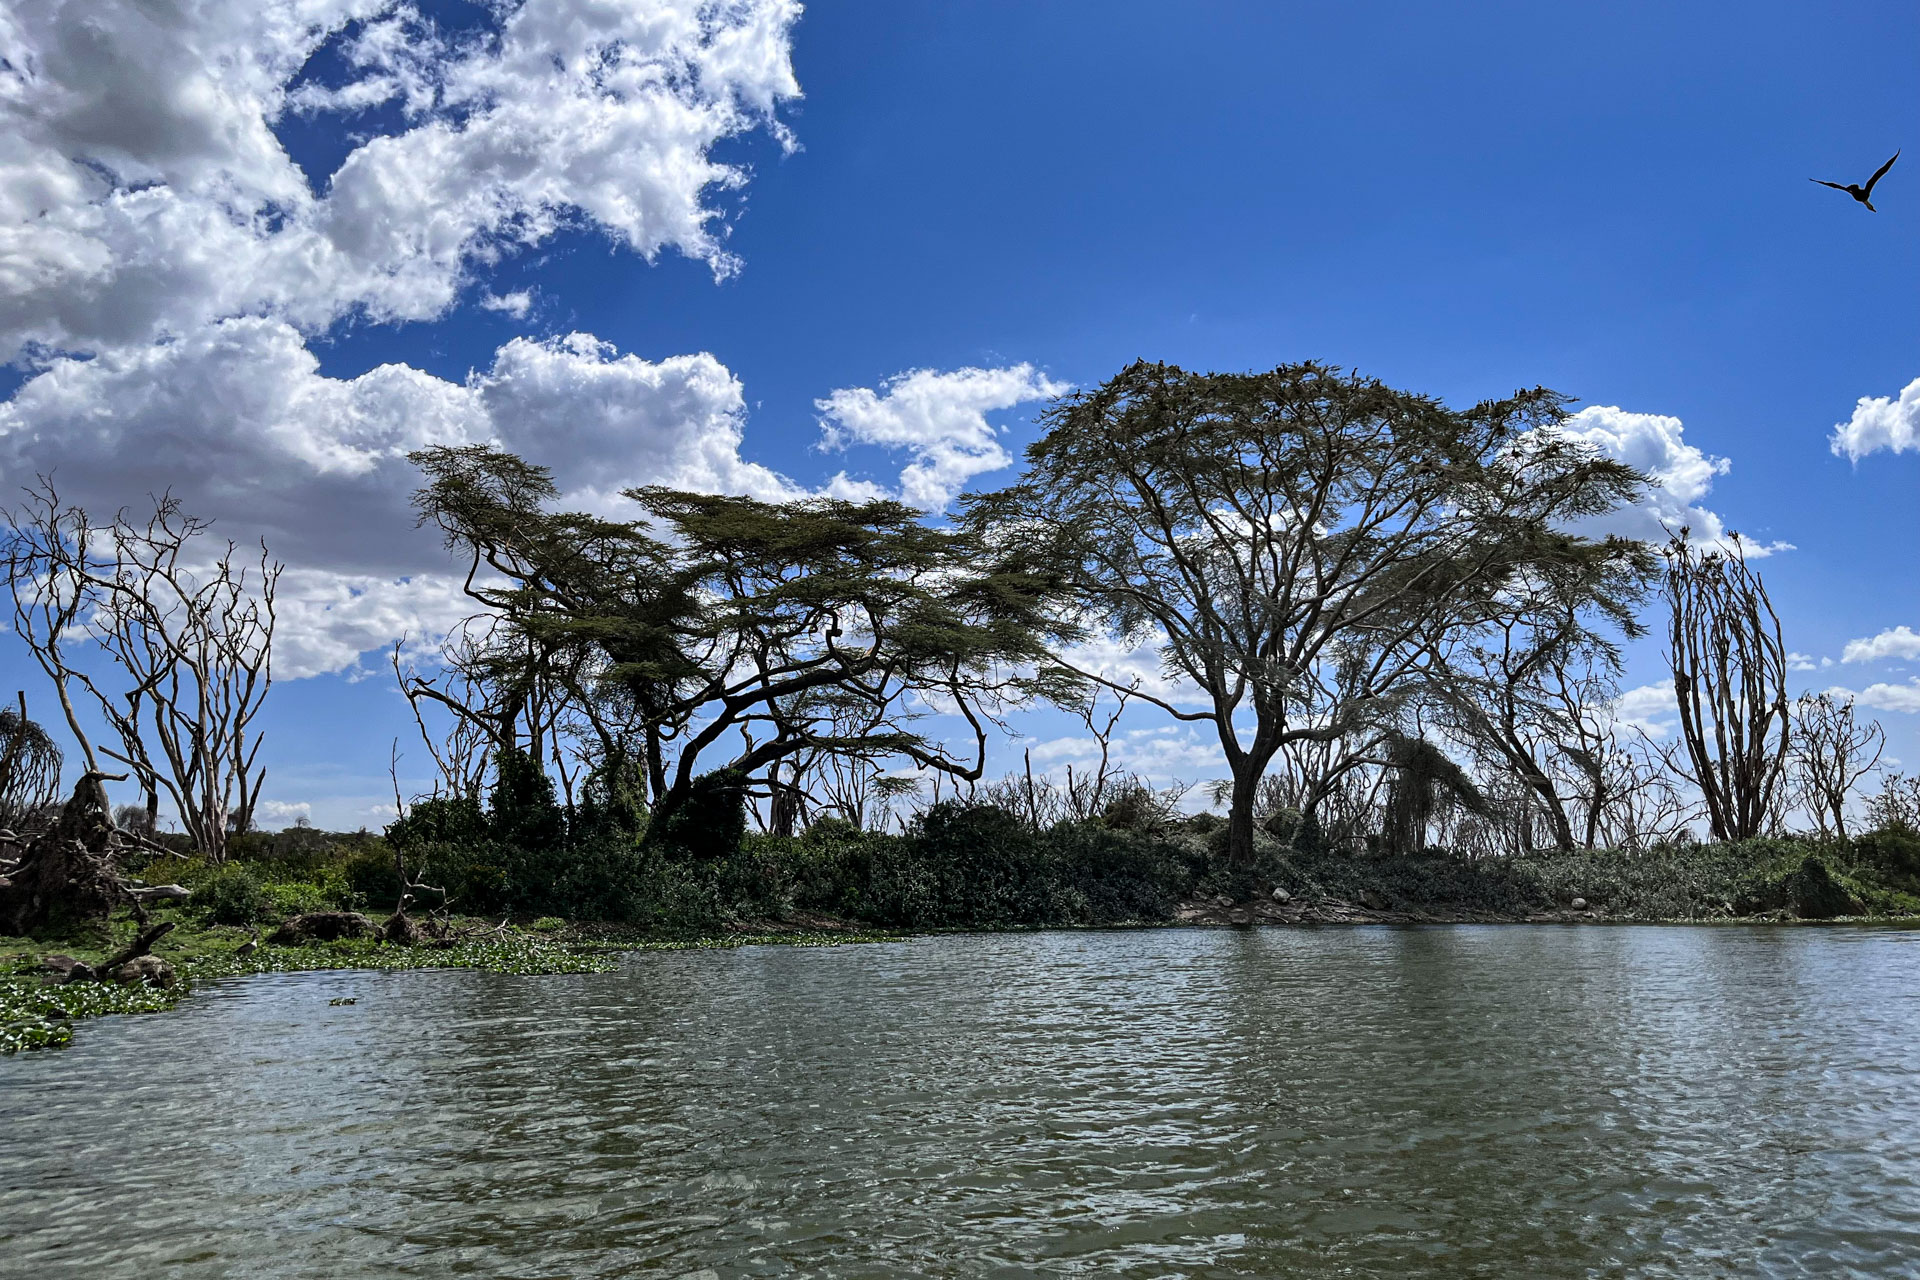 Big trees grow along the banks, thanks to years of water-rich soil